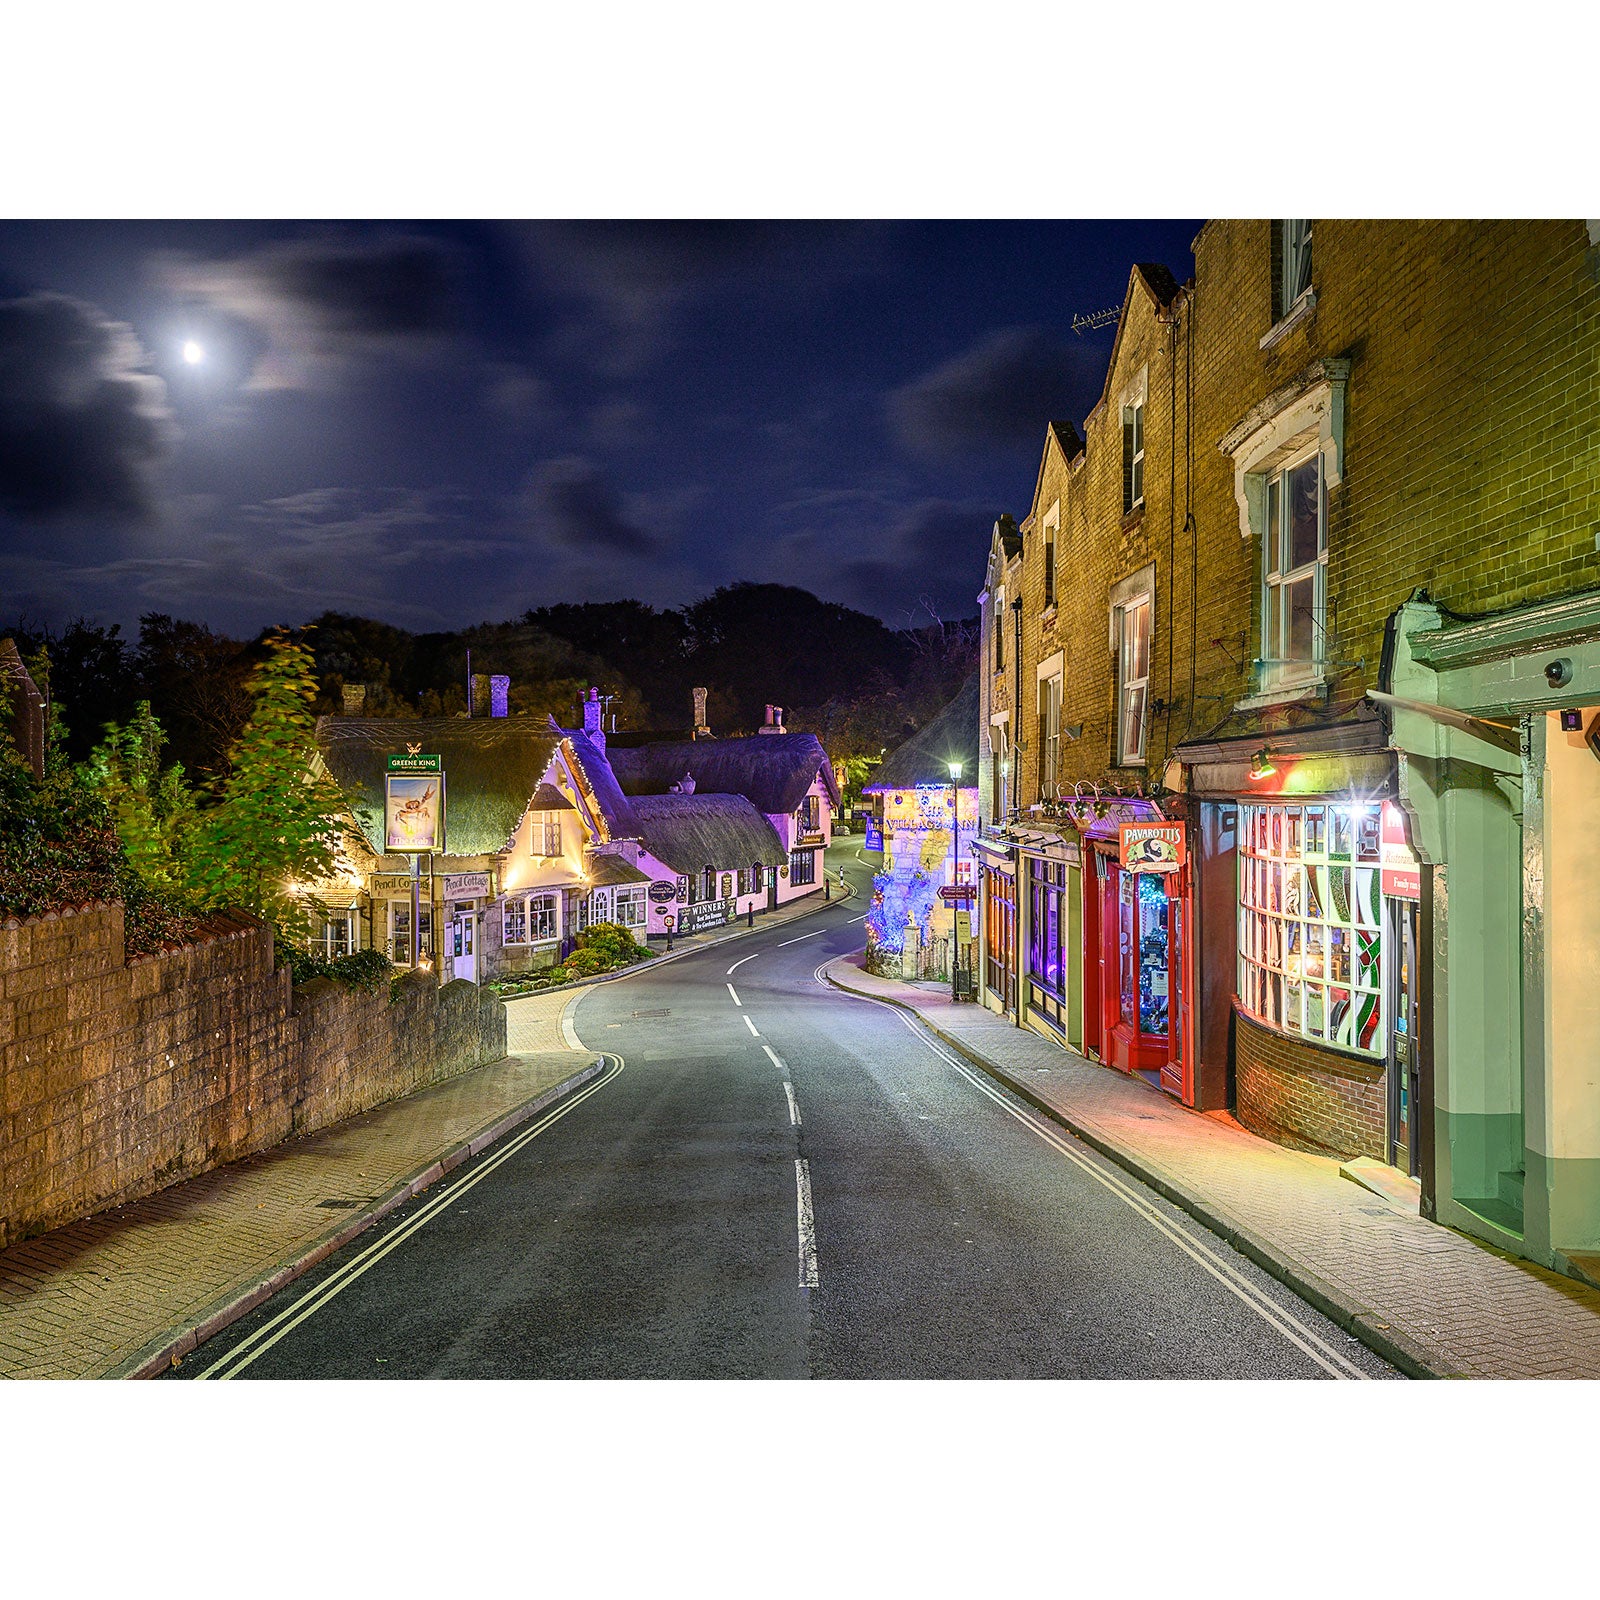 A tranquil nighttime view of Shanklin Old Village in a quaint Isle with vintage buildings and a glowing full moon captured by Available Light Photography.